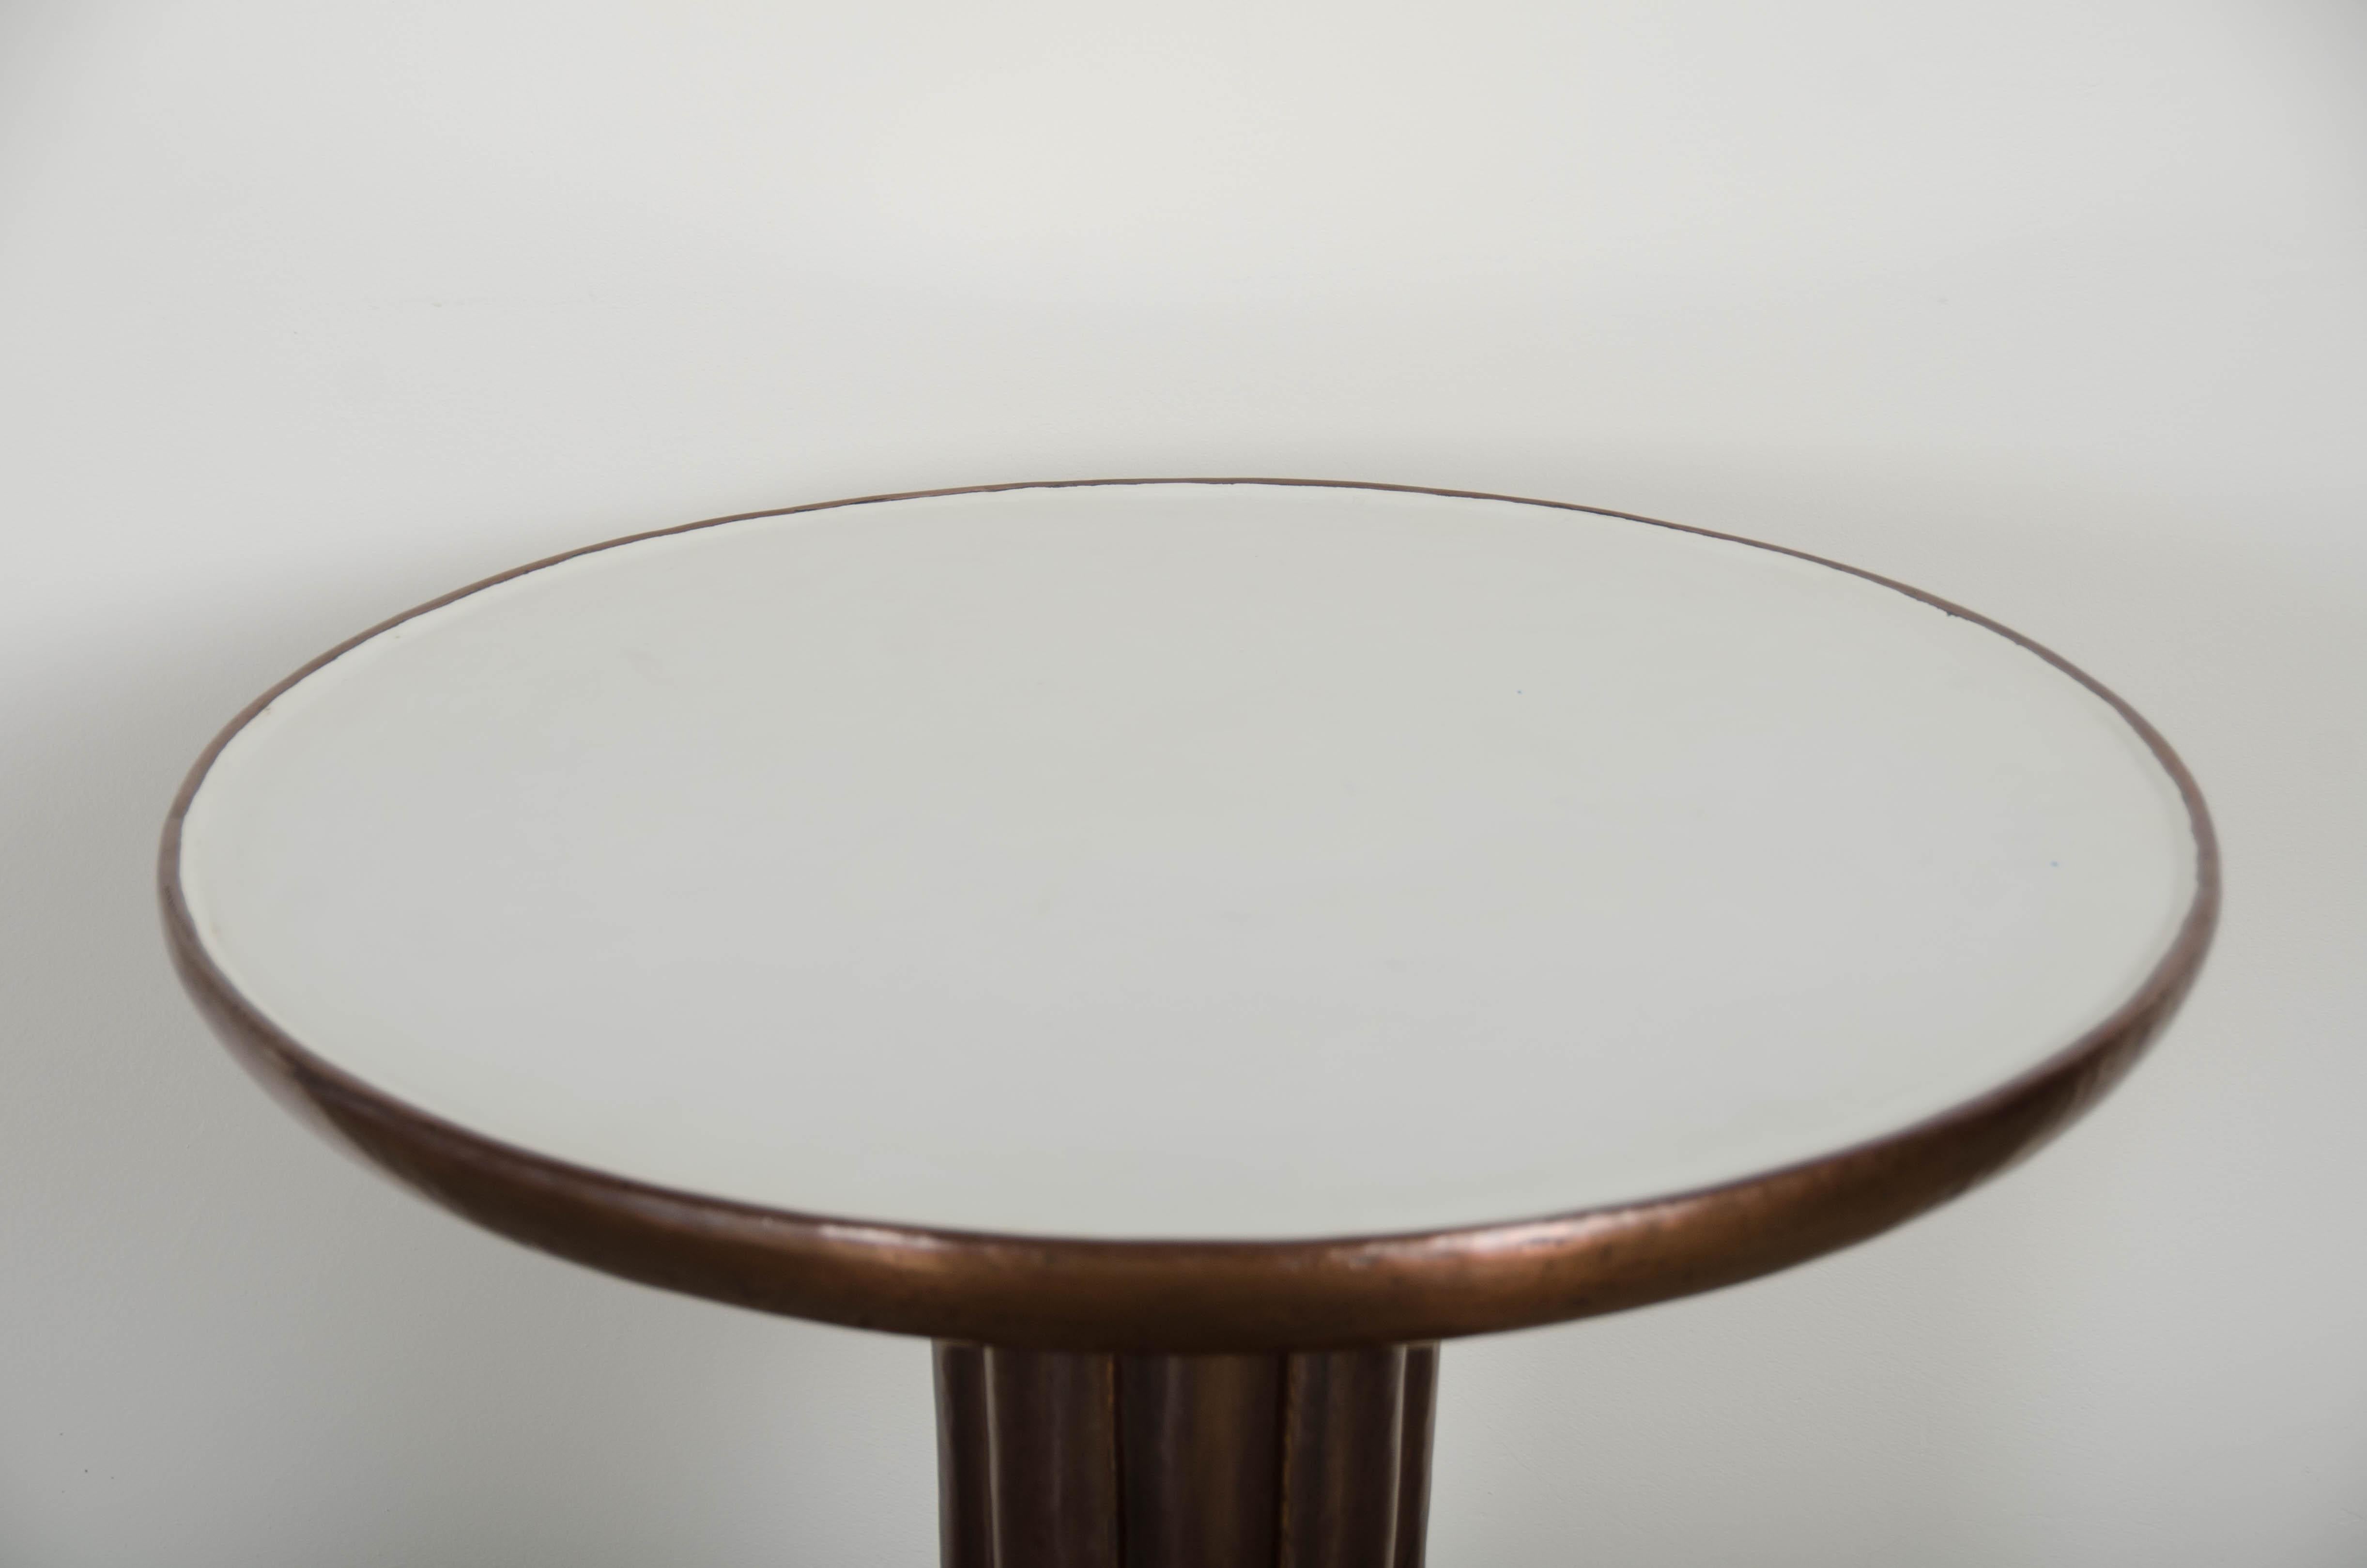 Lobed Le Verre Table - Cream Lacquer and Copper by Robert Kuo, Limited Edition In New Condition For Sale In Los Angeles, CA